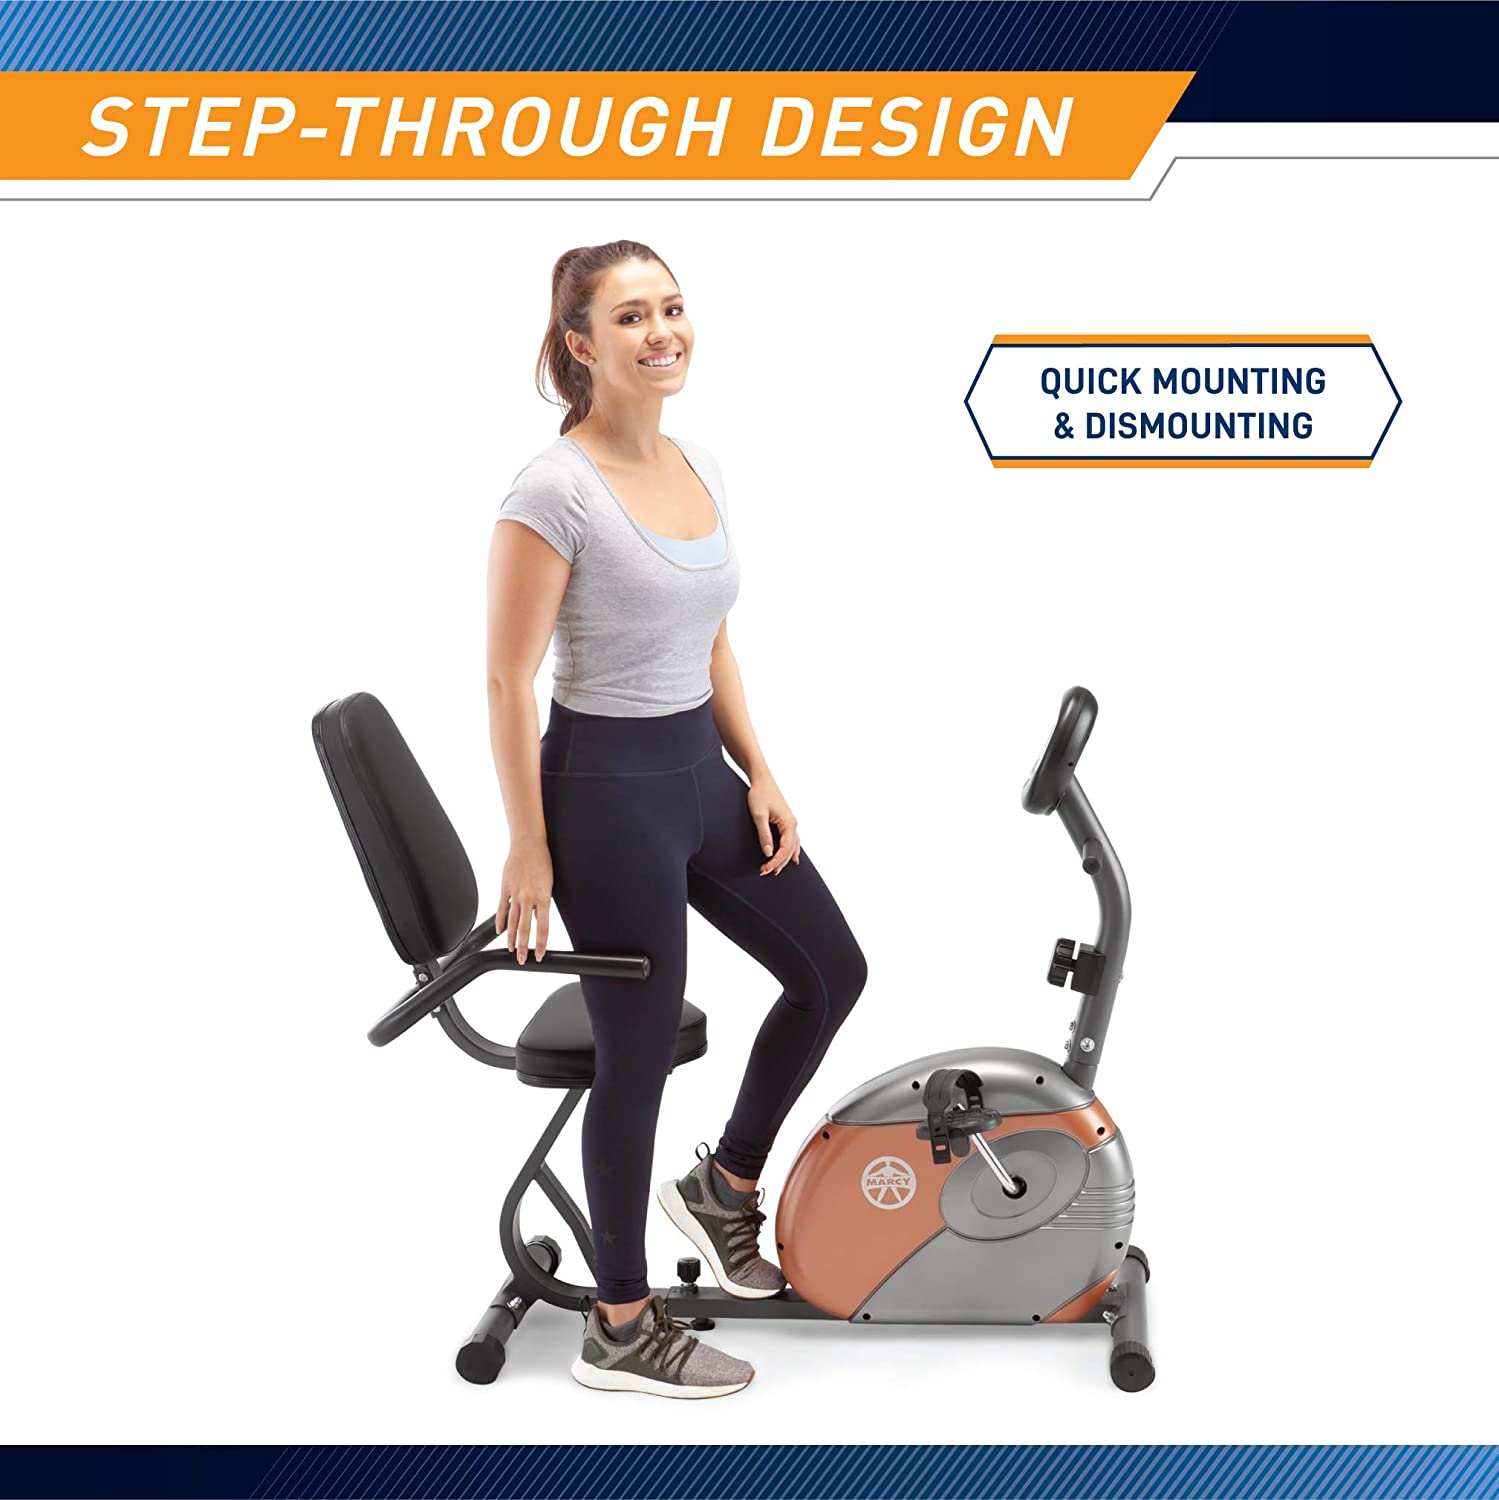 Marcy recumbent exercise bike with resistance me 709 review